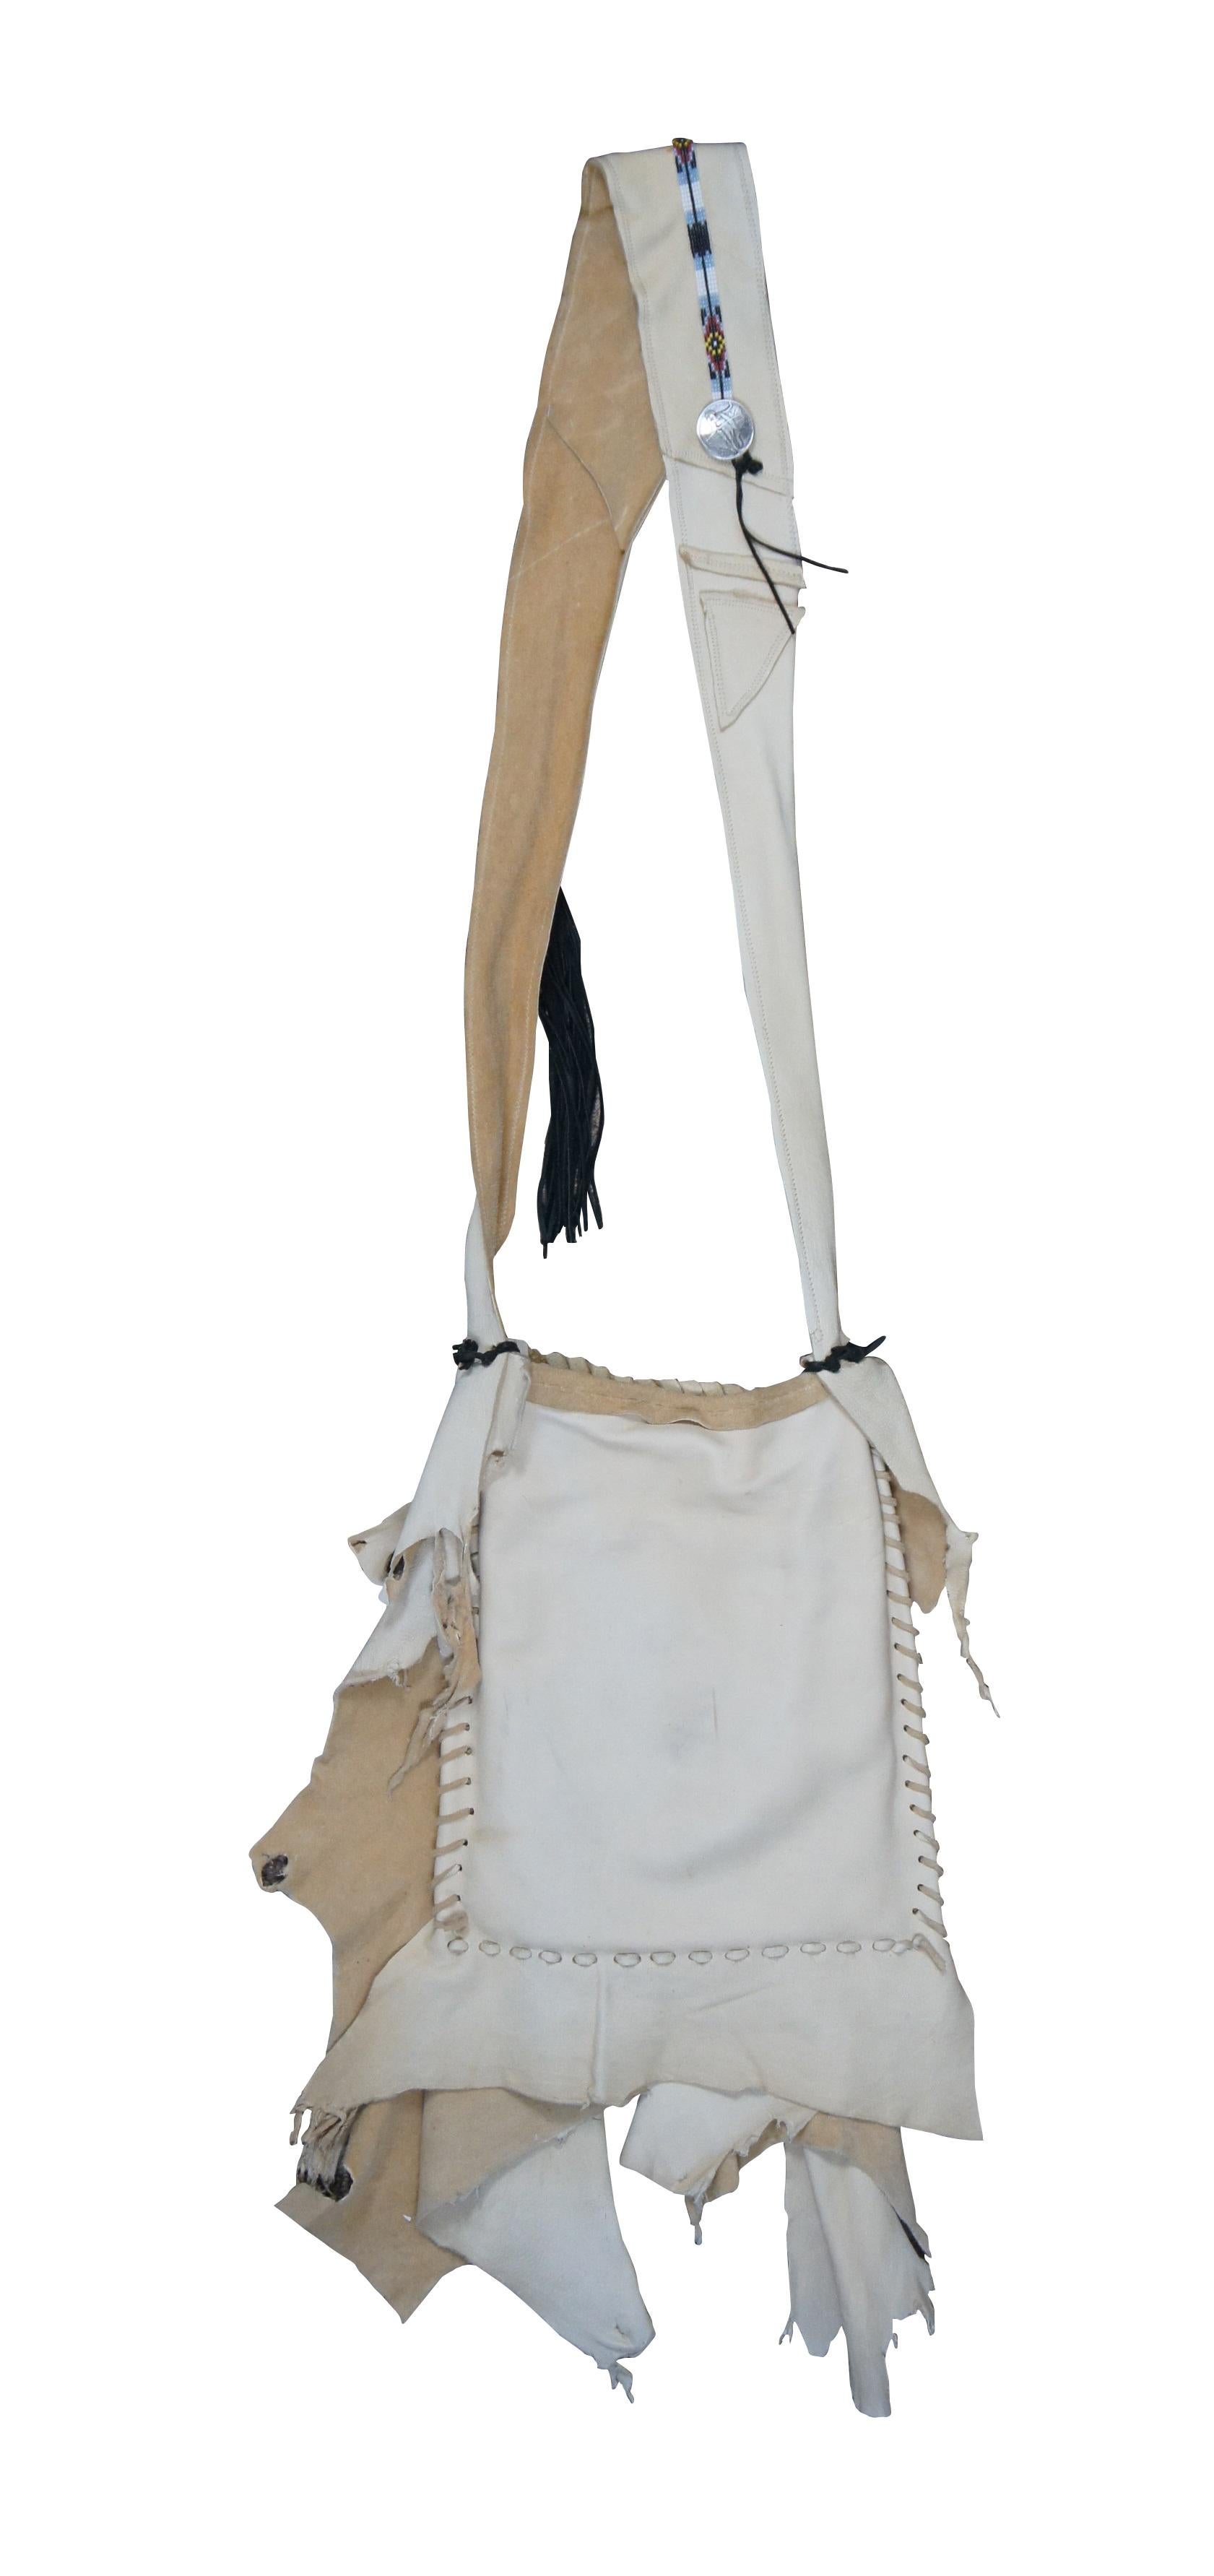 Late 20th century Native American style shoulder bag / purse / satchel. Made of soft asymmetrically cut off-white leather with decorative stitching, antique United States 1904 